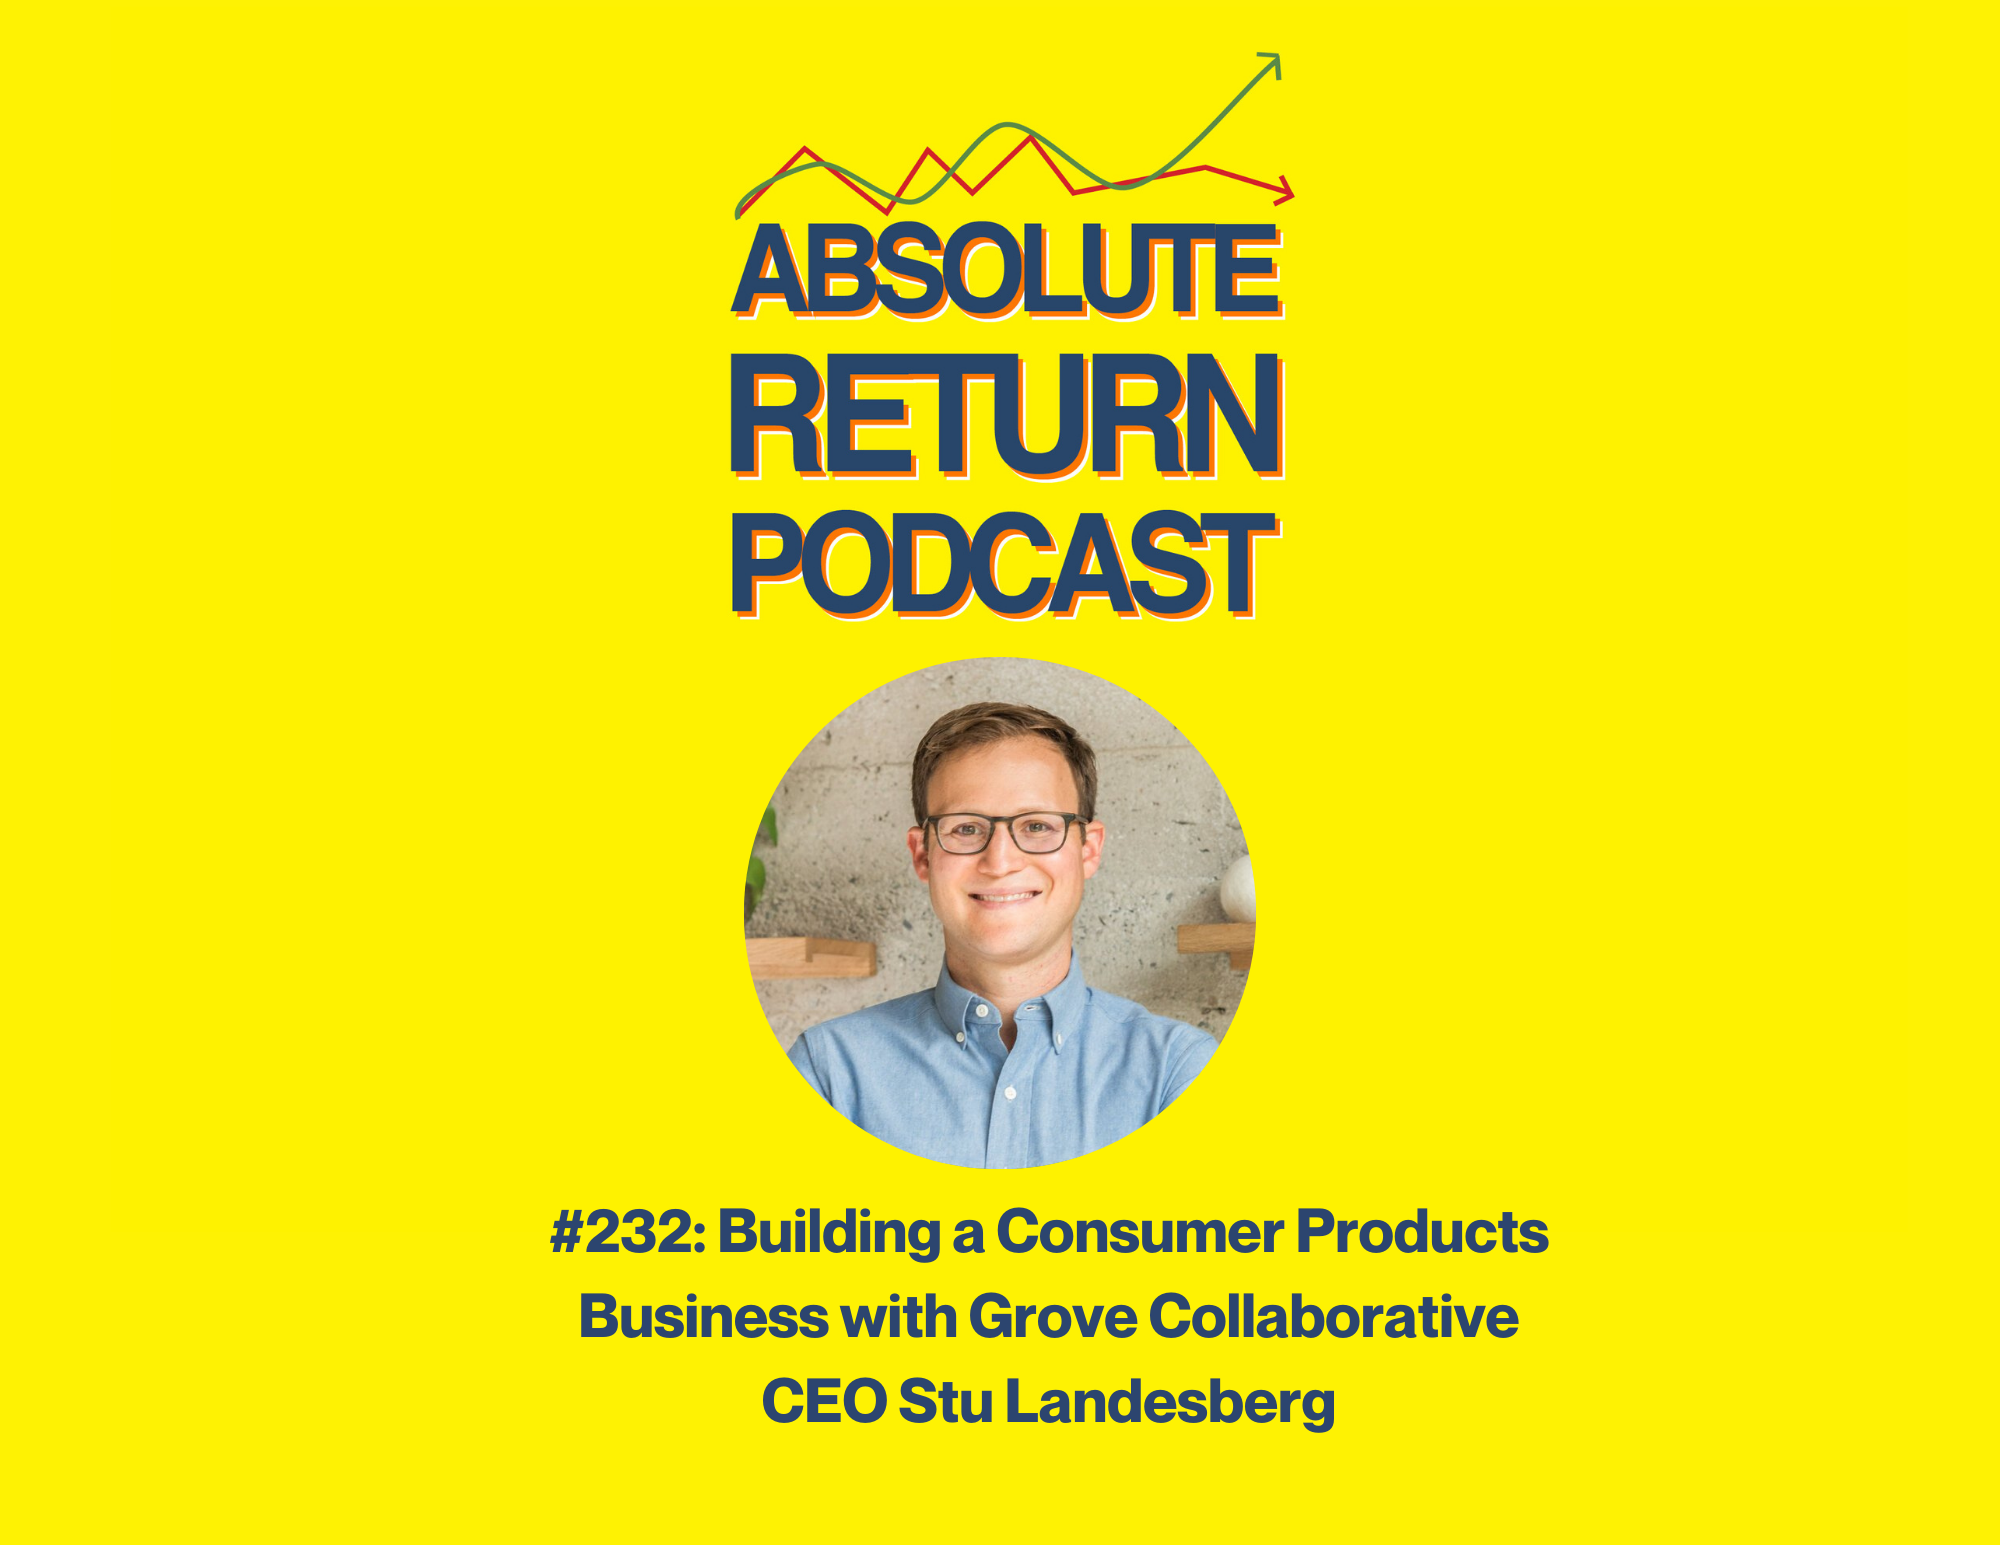 Absolute Return Podcast #232: On Building a Consumer Products Business with Grove Collaborative CEO Stu Landesberg